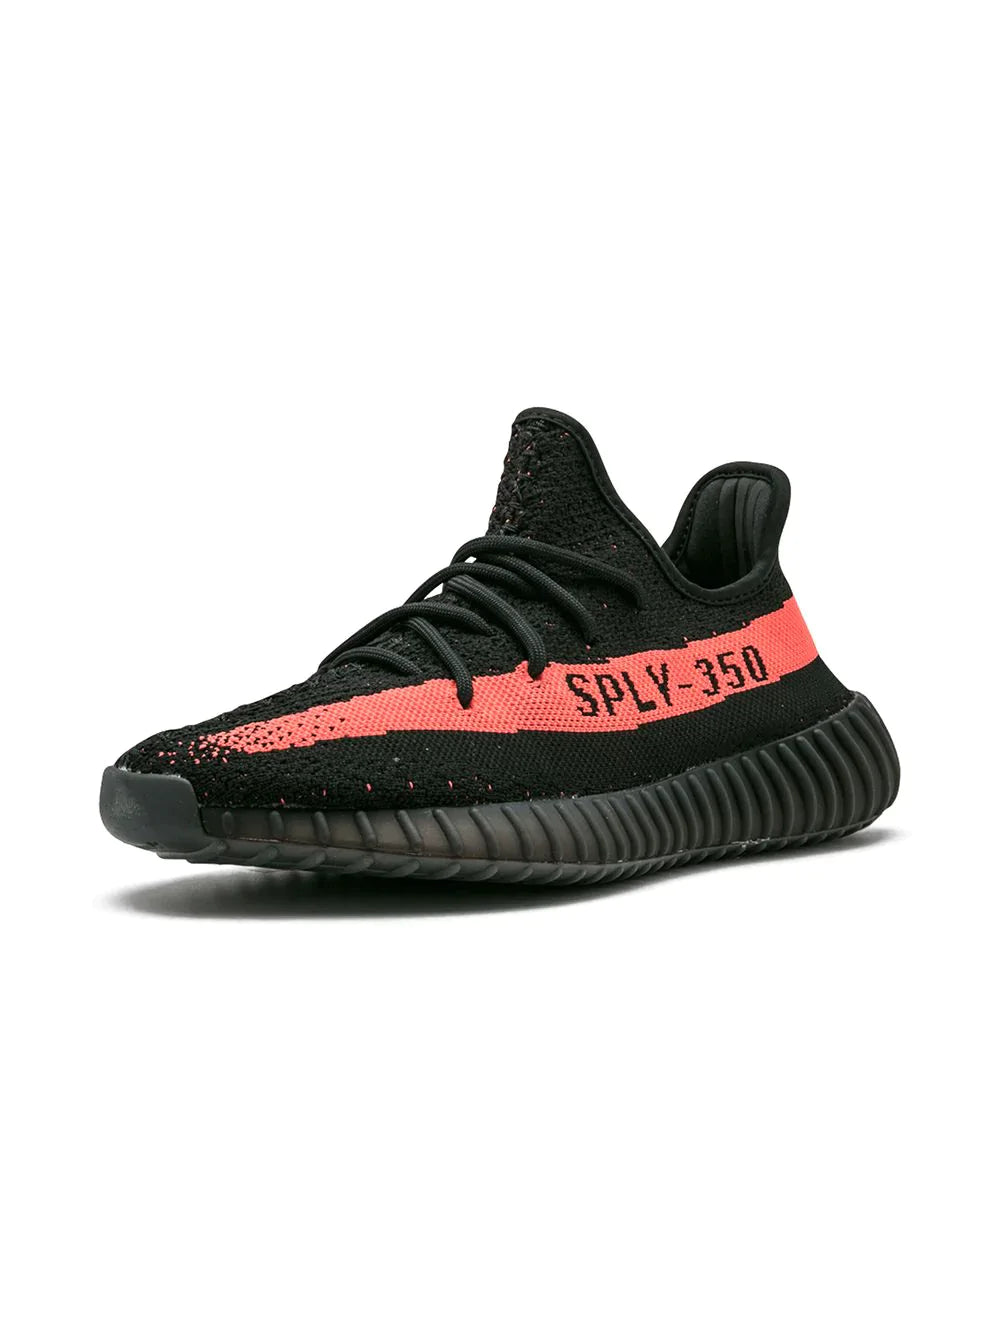 adidas YEEZY Yeezy Boost 350 V2 "Red"